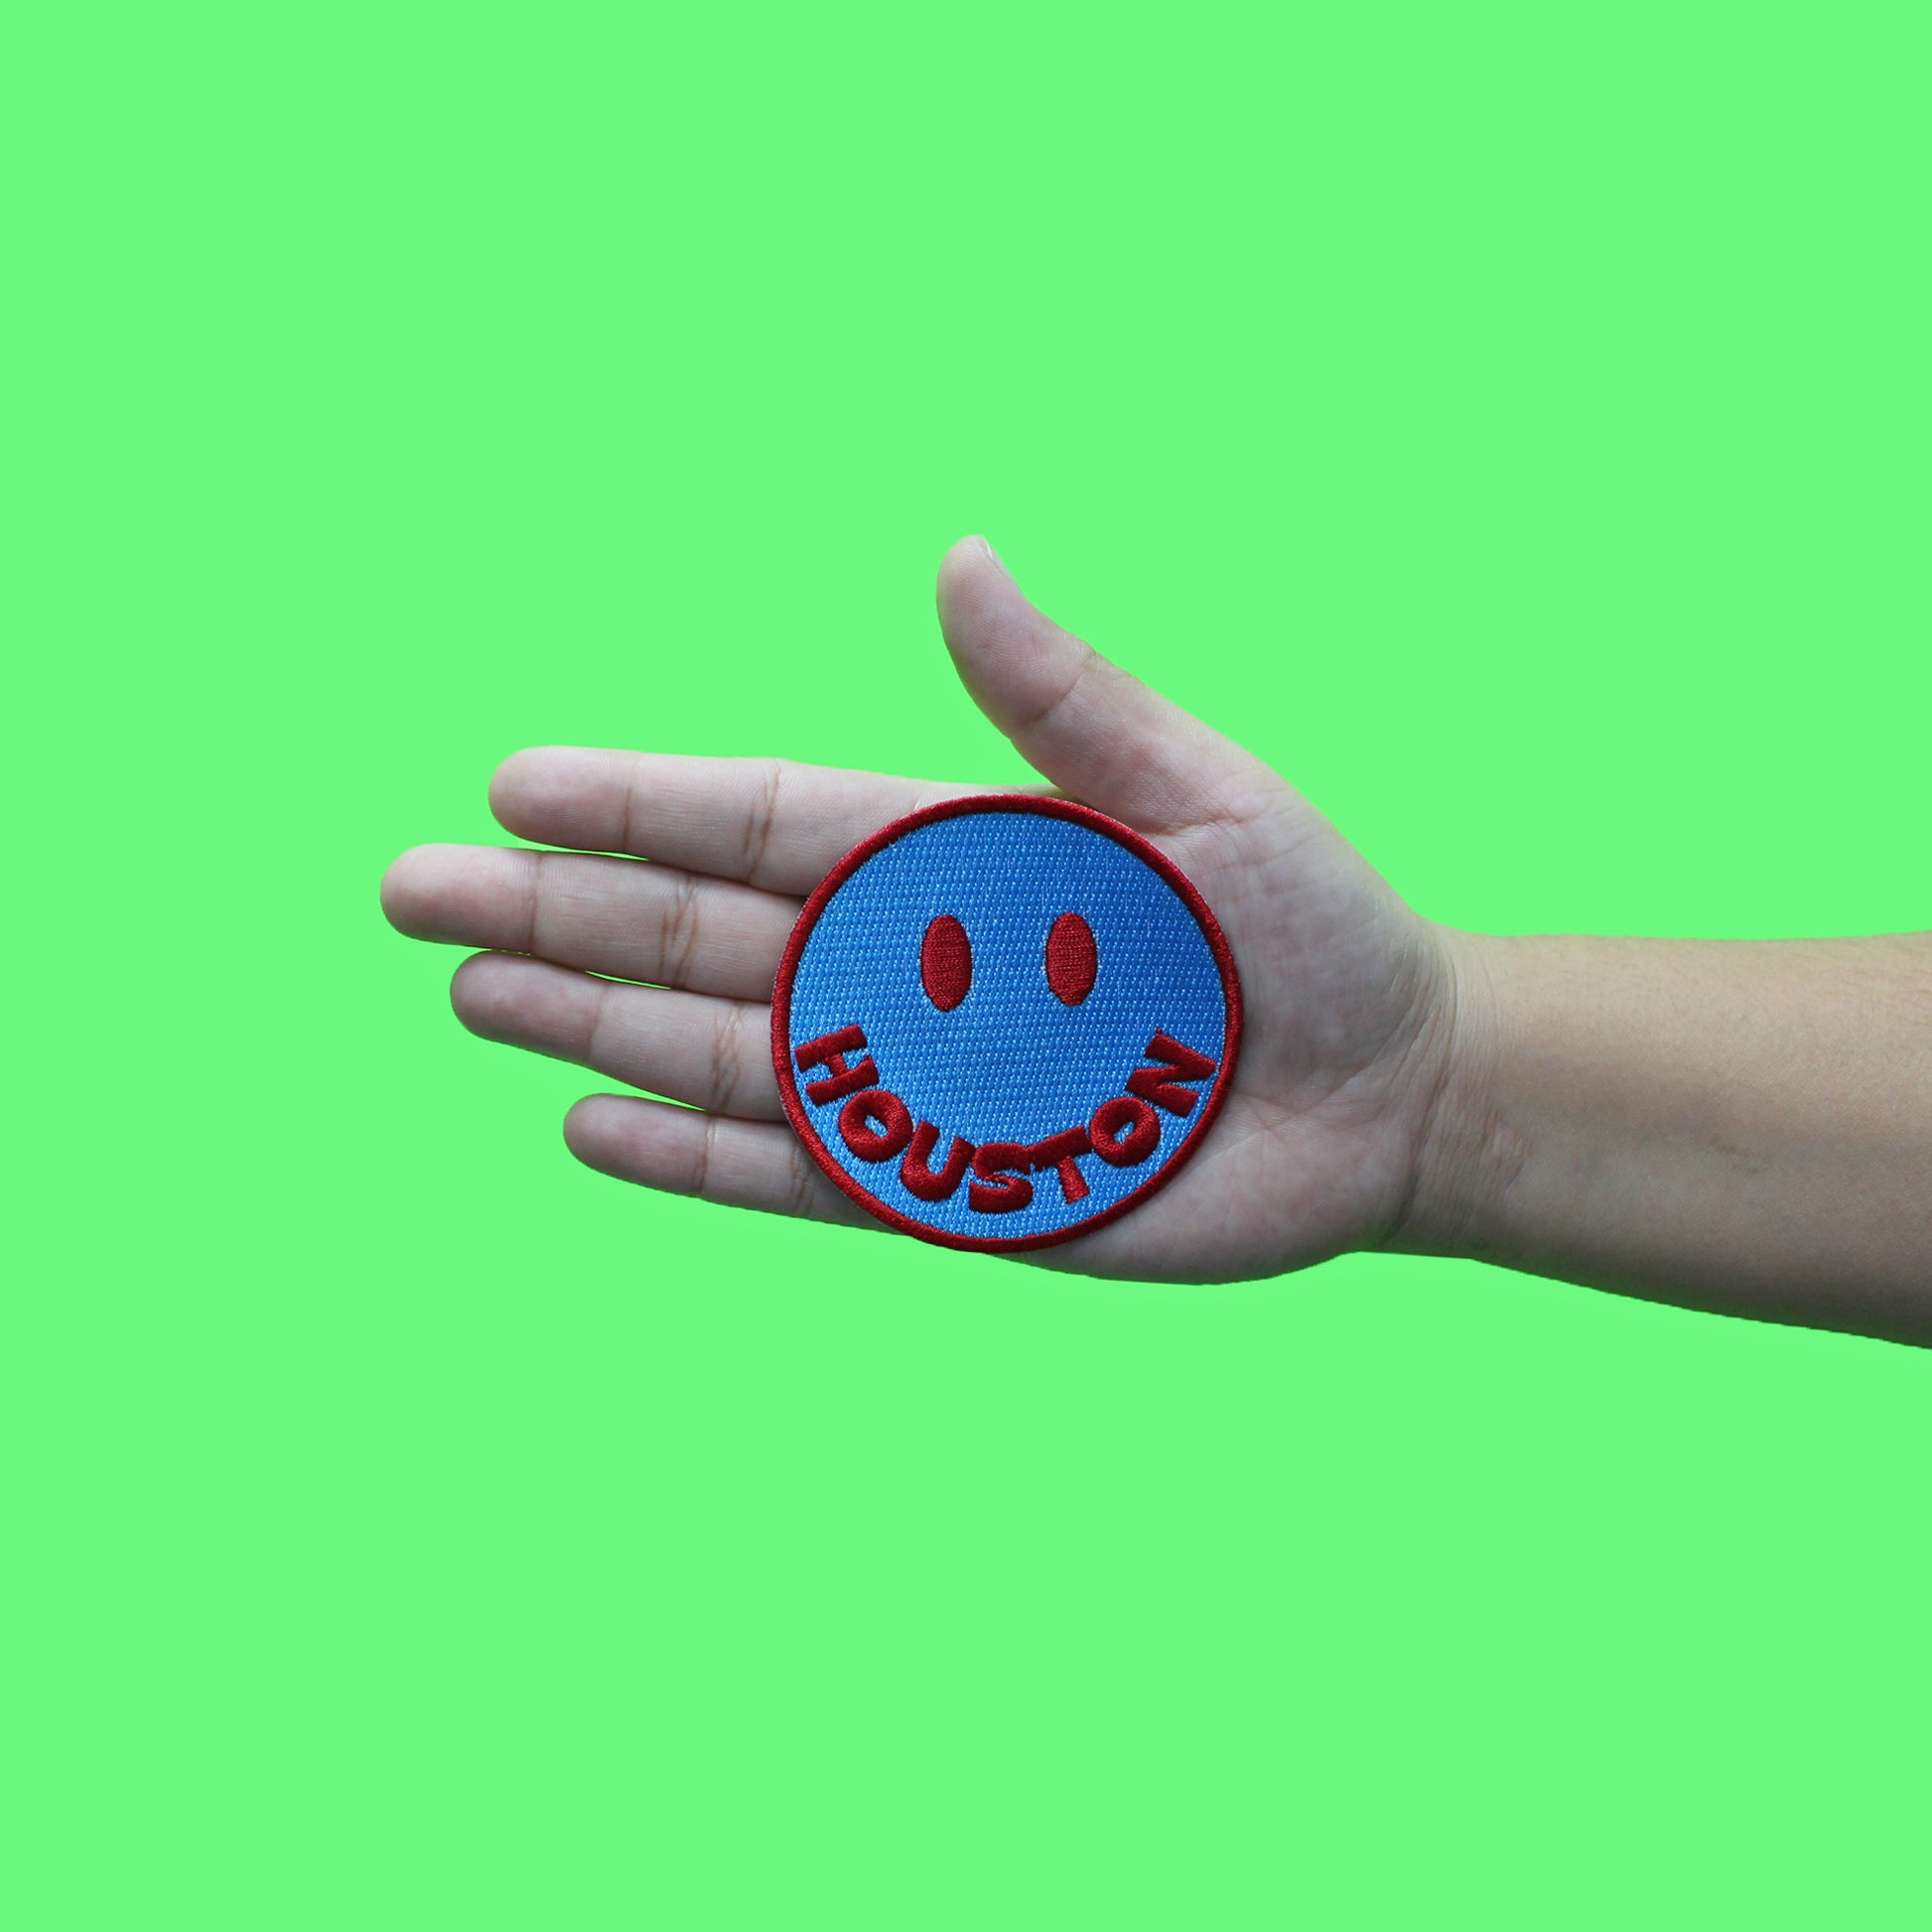 New York Smiley Face Patch Blue Emoji Embroidered Iron on